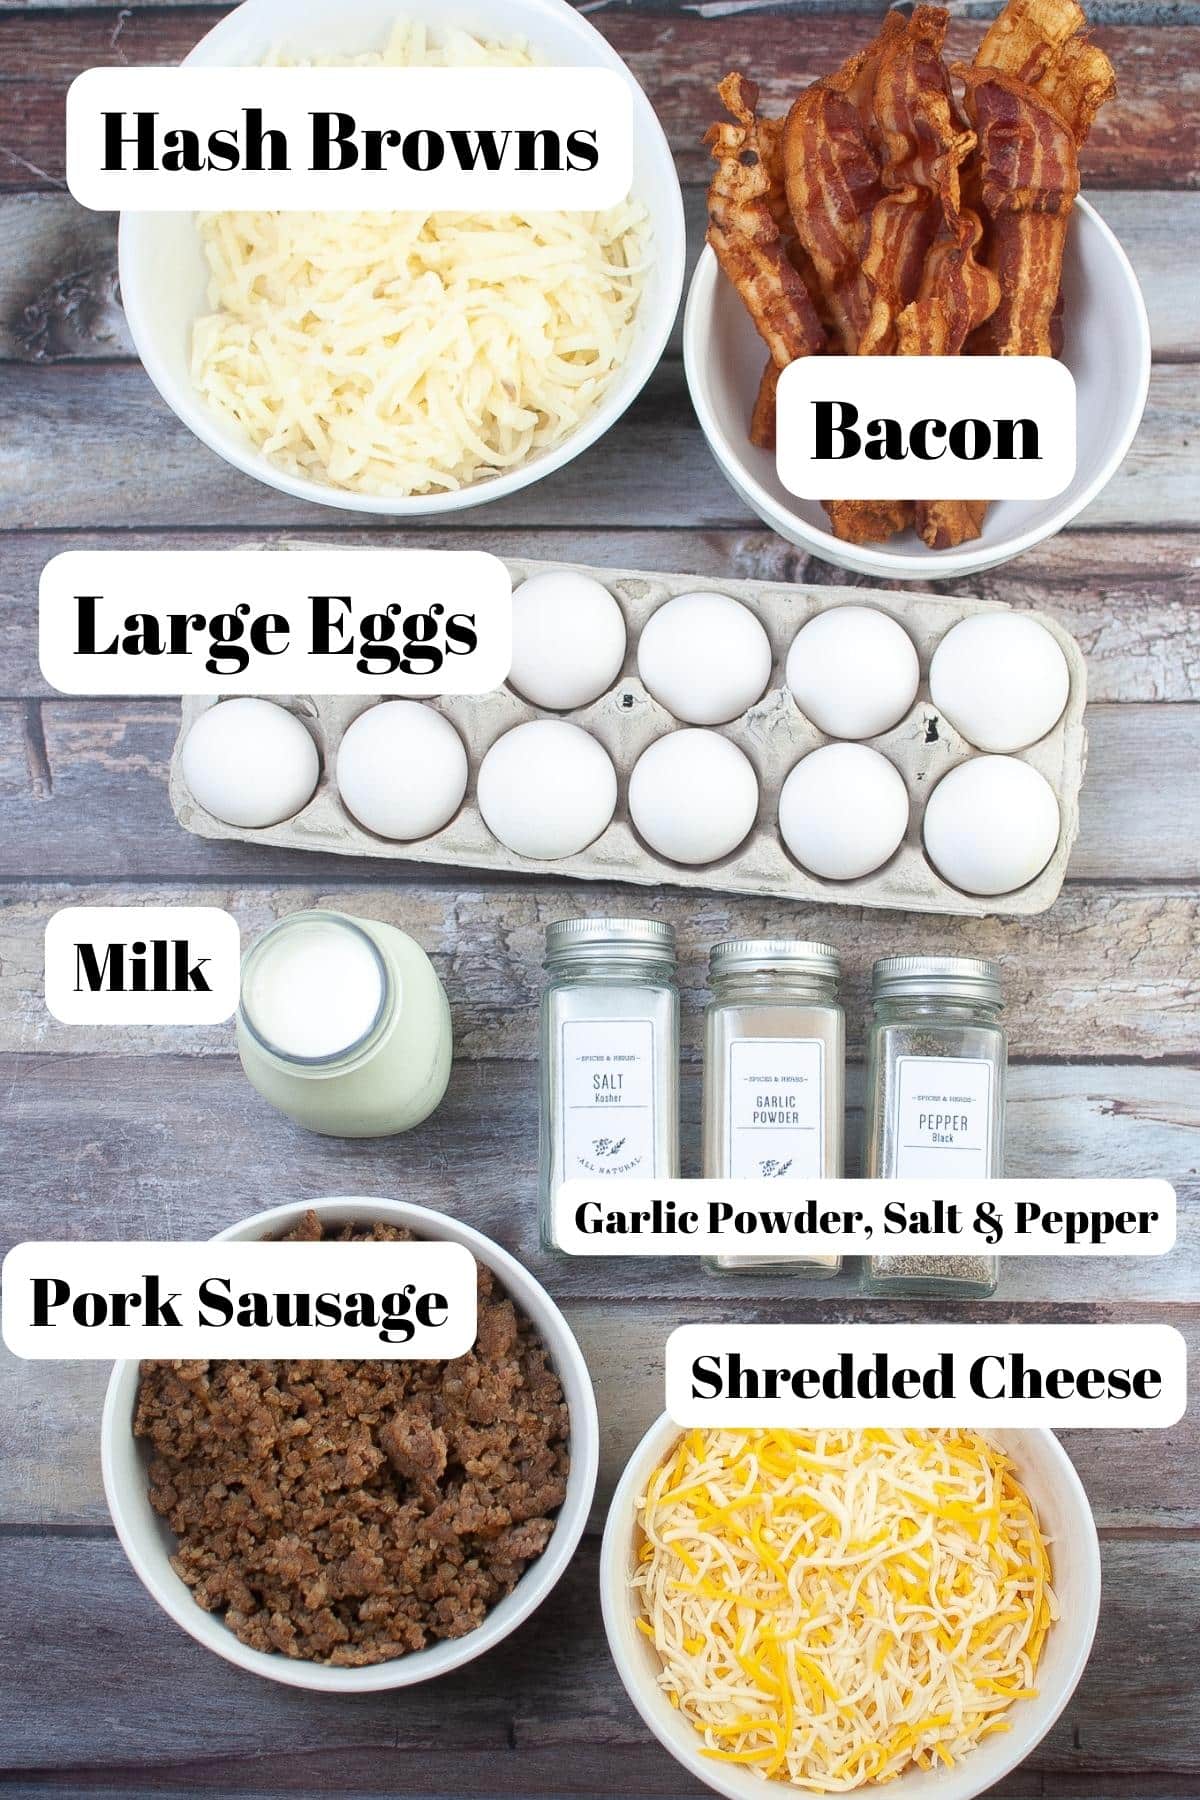 hash brown, bacon, cheese, eggs, milk, pork sausage and spices for air fryer breakfast casserole